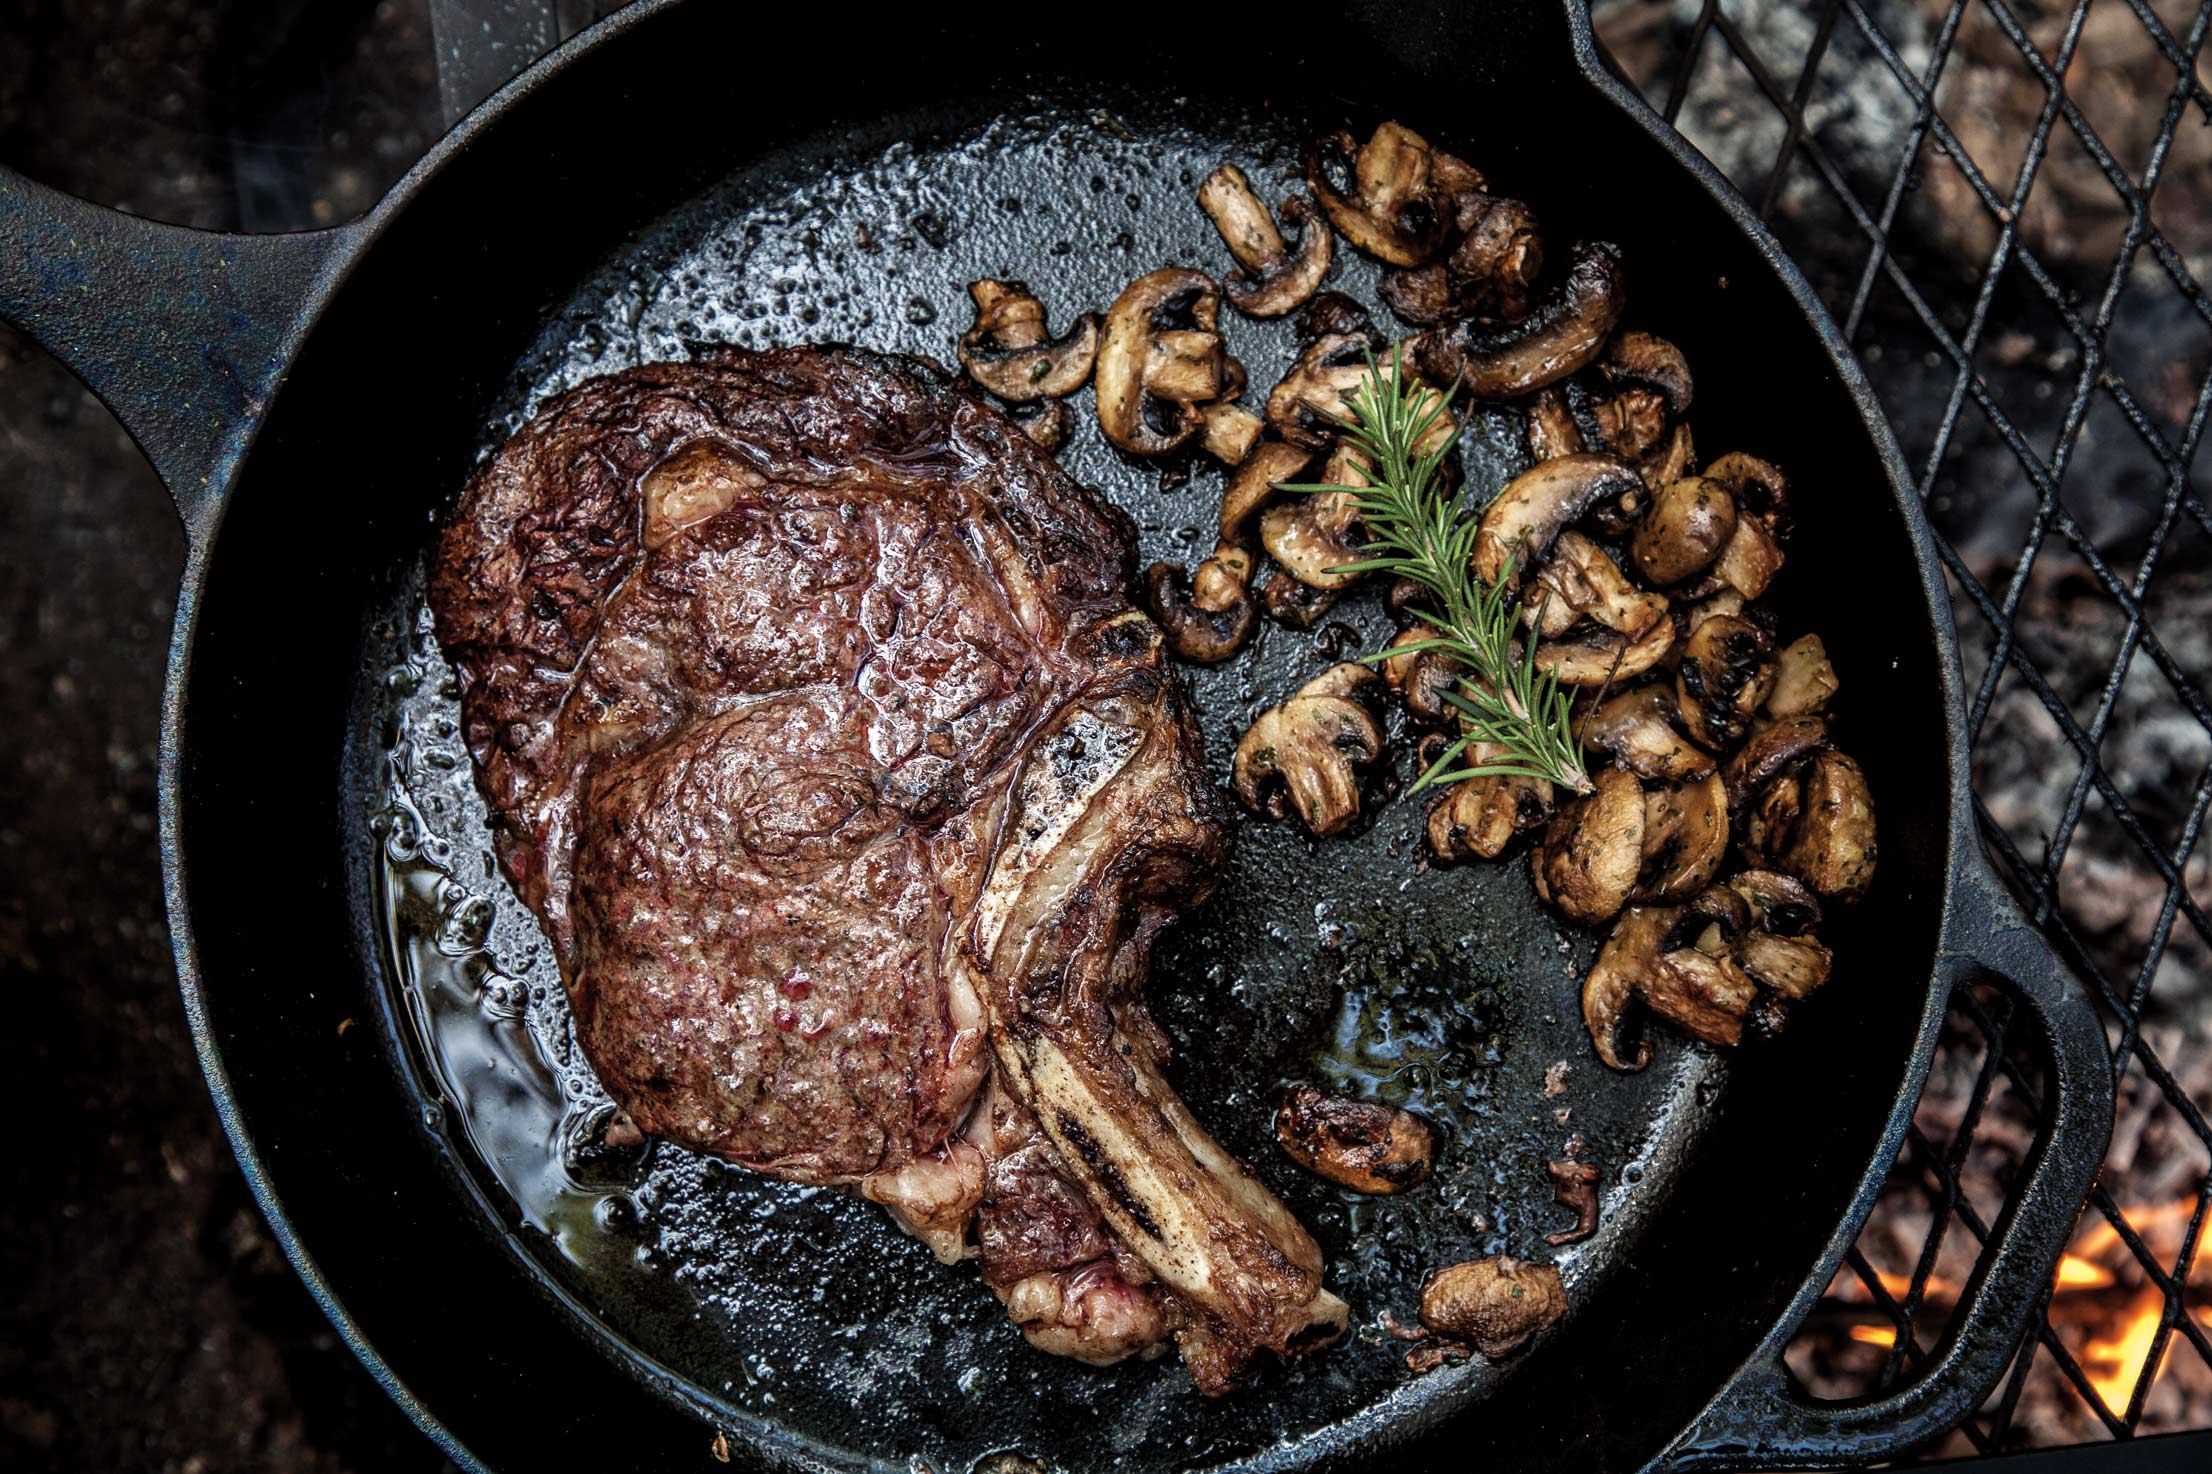 Steak and mushrooms in a cast iron skillet